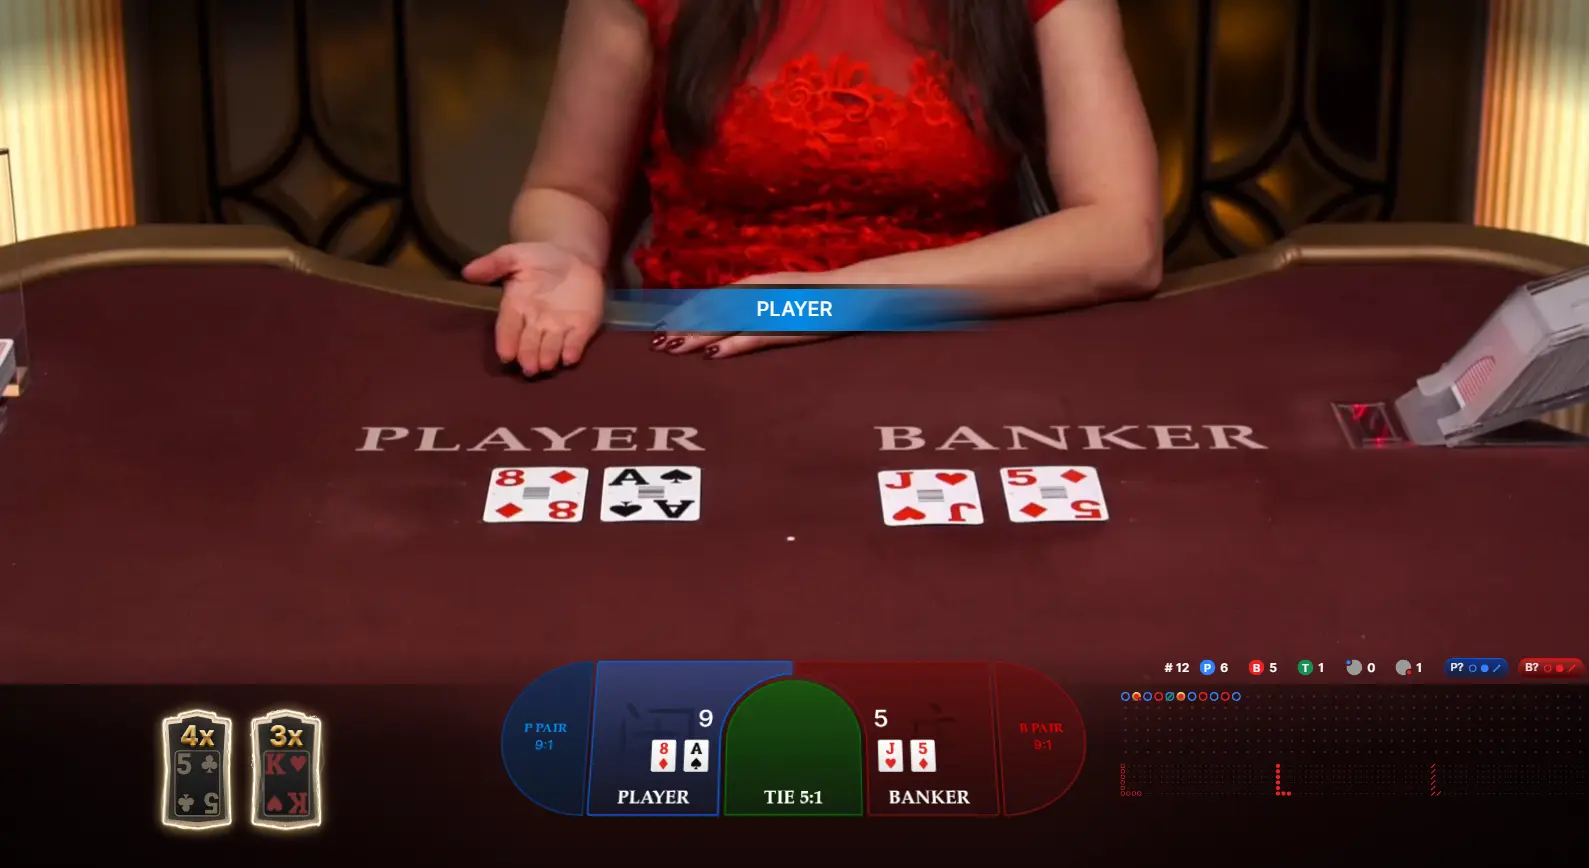 As players eagerly look on through their screens, the smiling dealer confidently announces the winning hand after the last cards are revealed to the baccarat table.